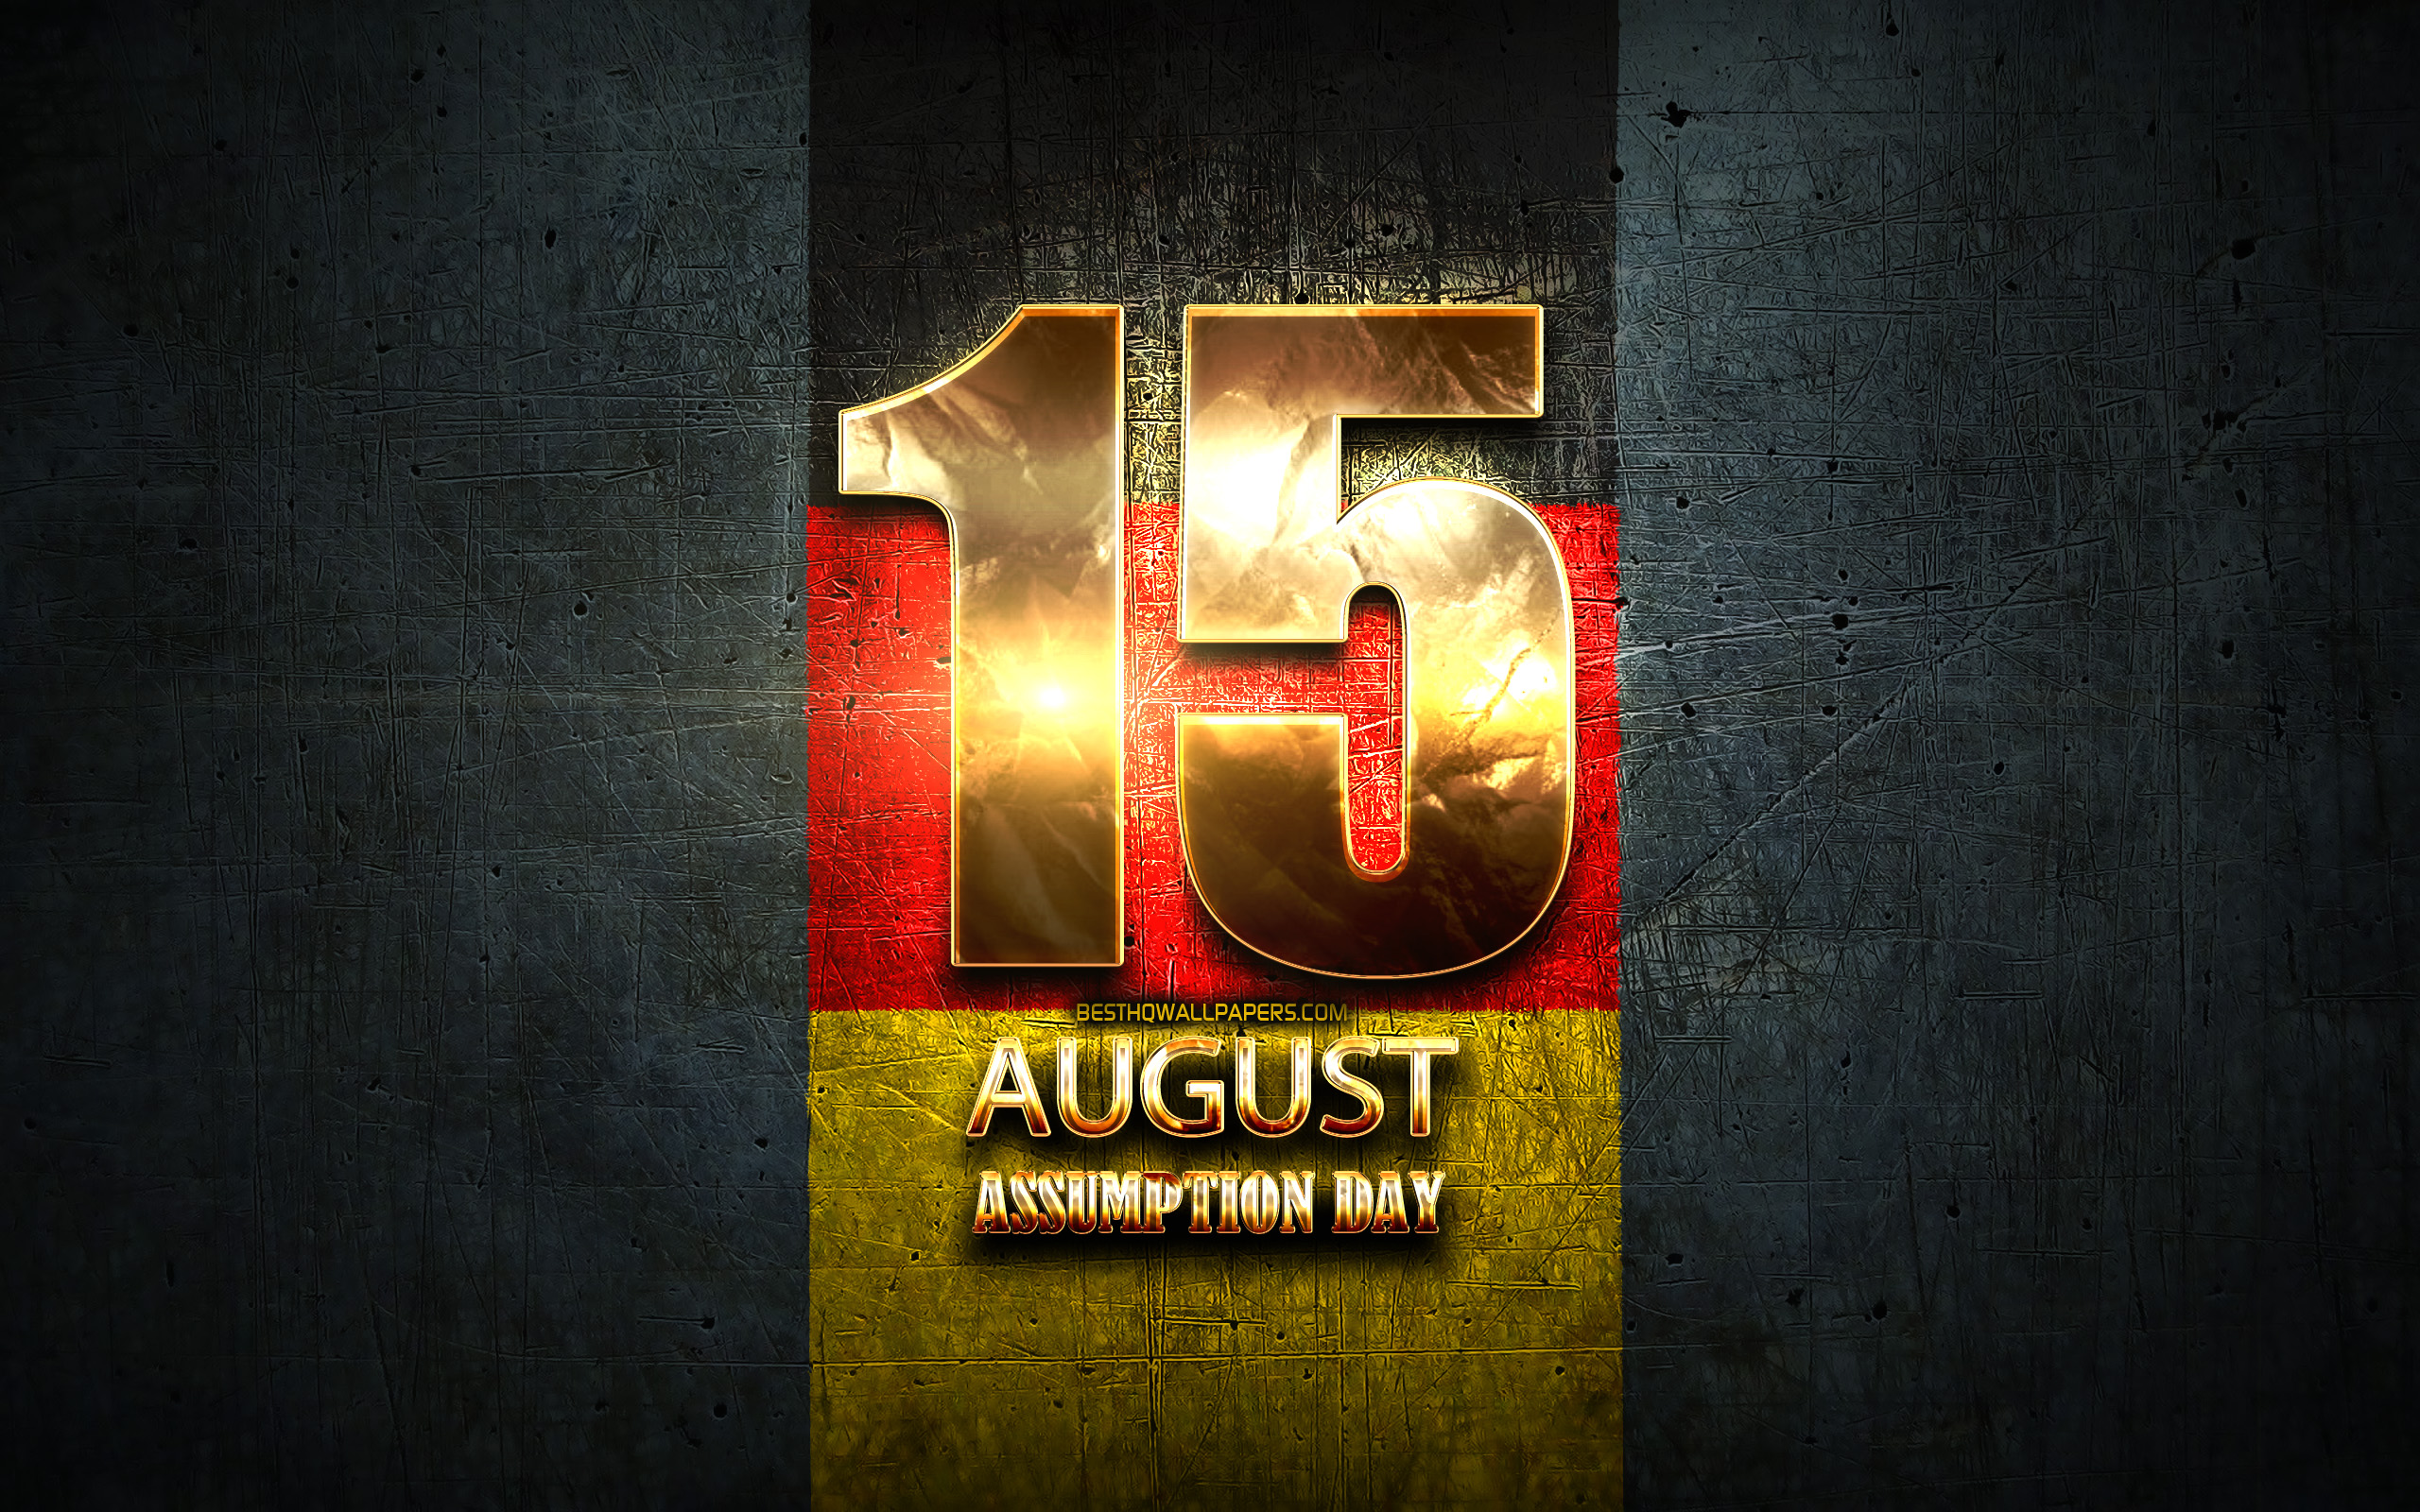 Download wallpapers Germany, Assumption Day, August 15, golden signs